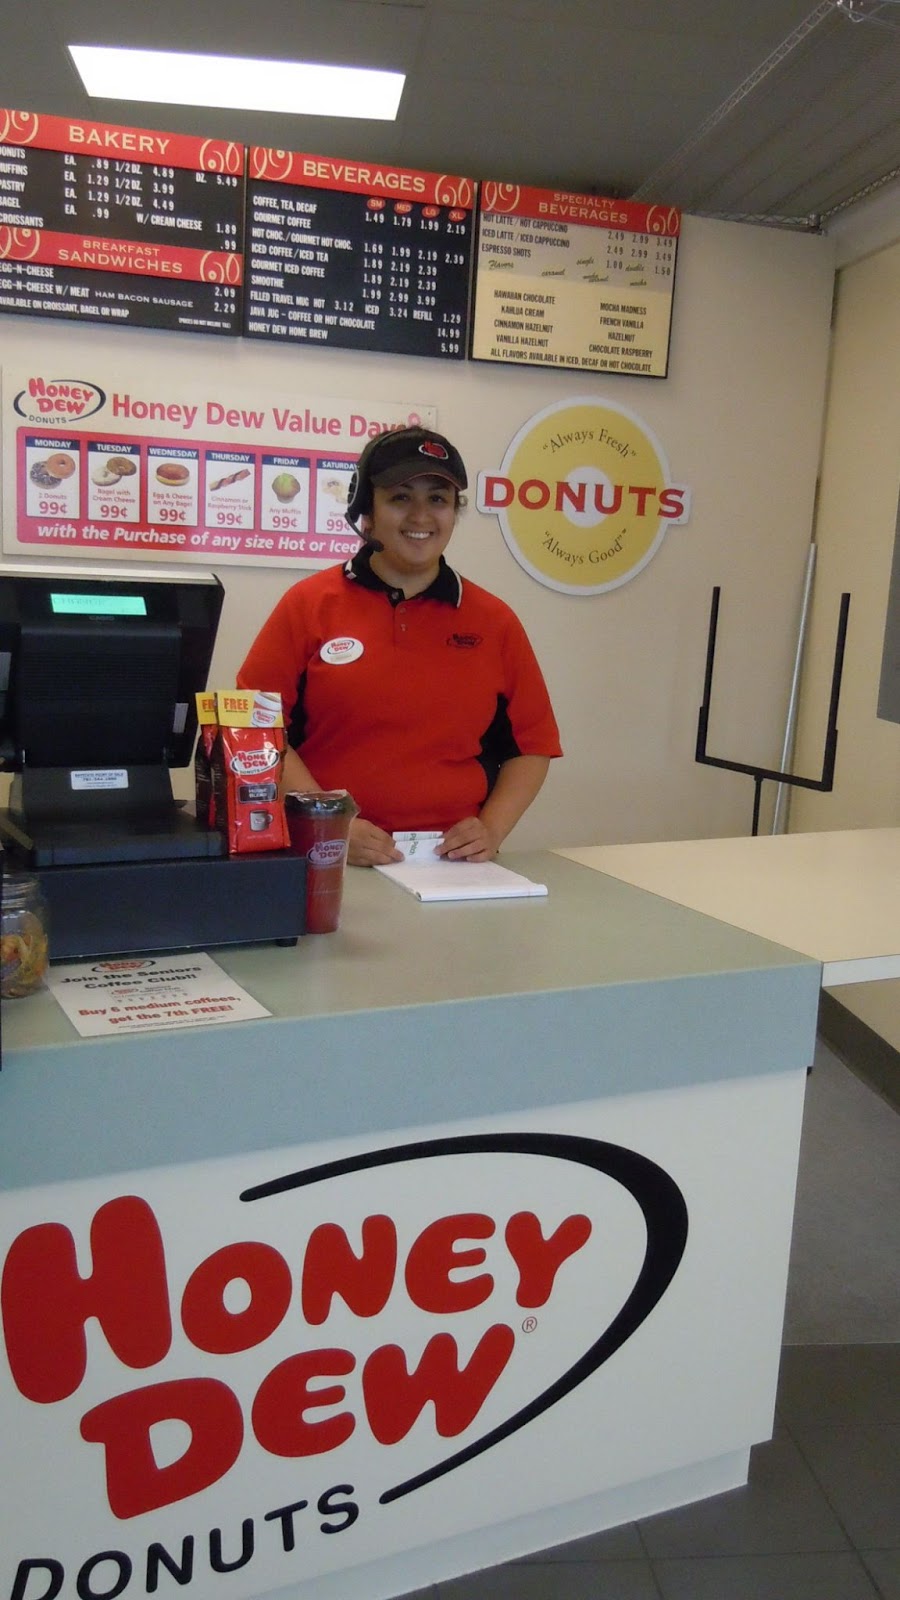 <u>Query</u>: A donut shop employee in a red shirt who is waiting to take an order<br>
      <u>Named Entity</u>: Honey Dew Donuts